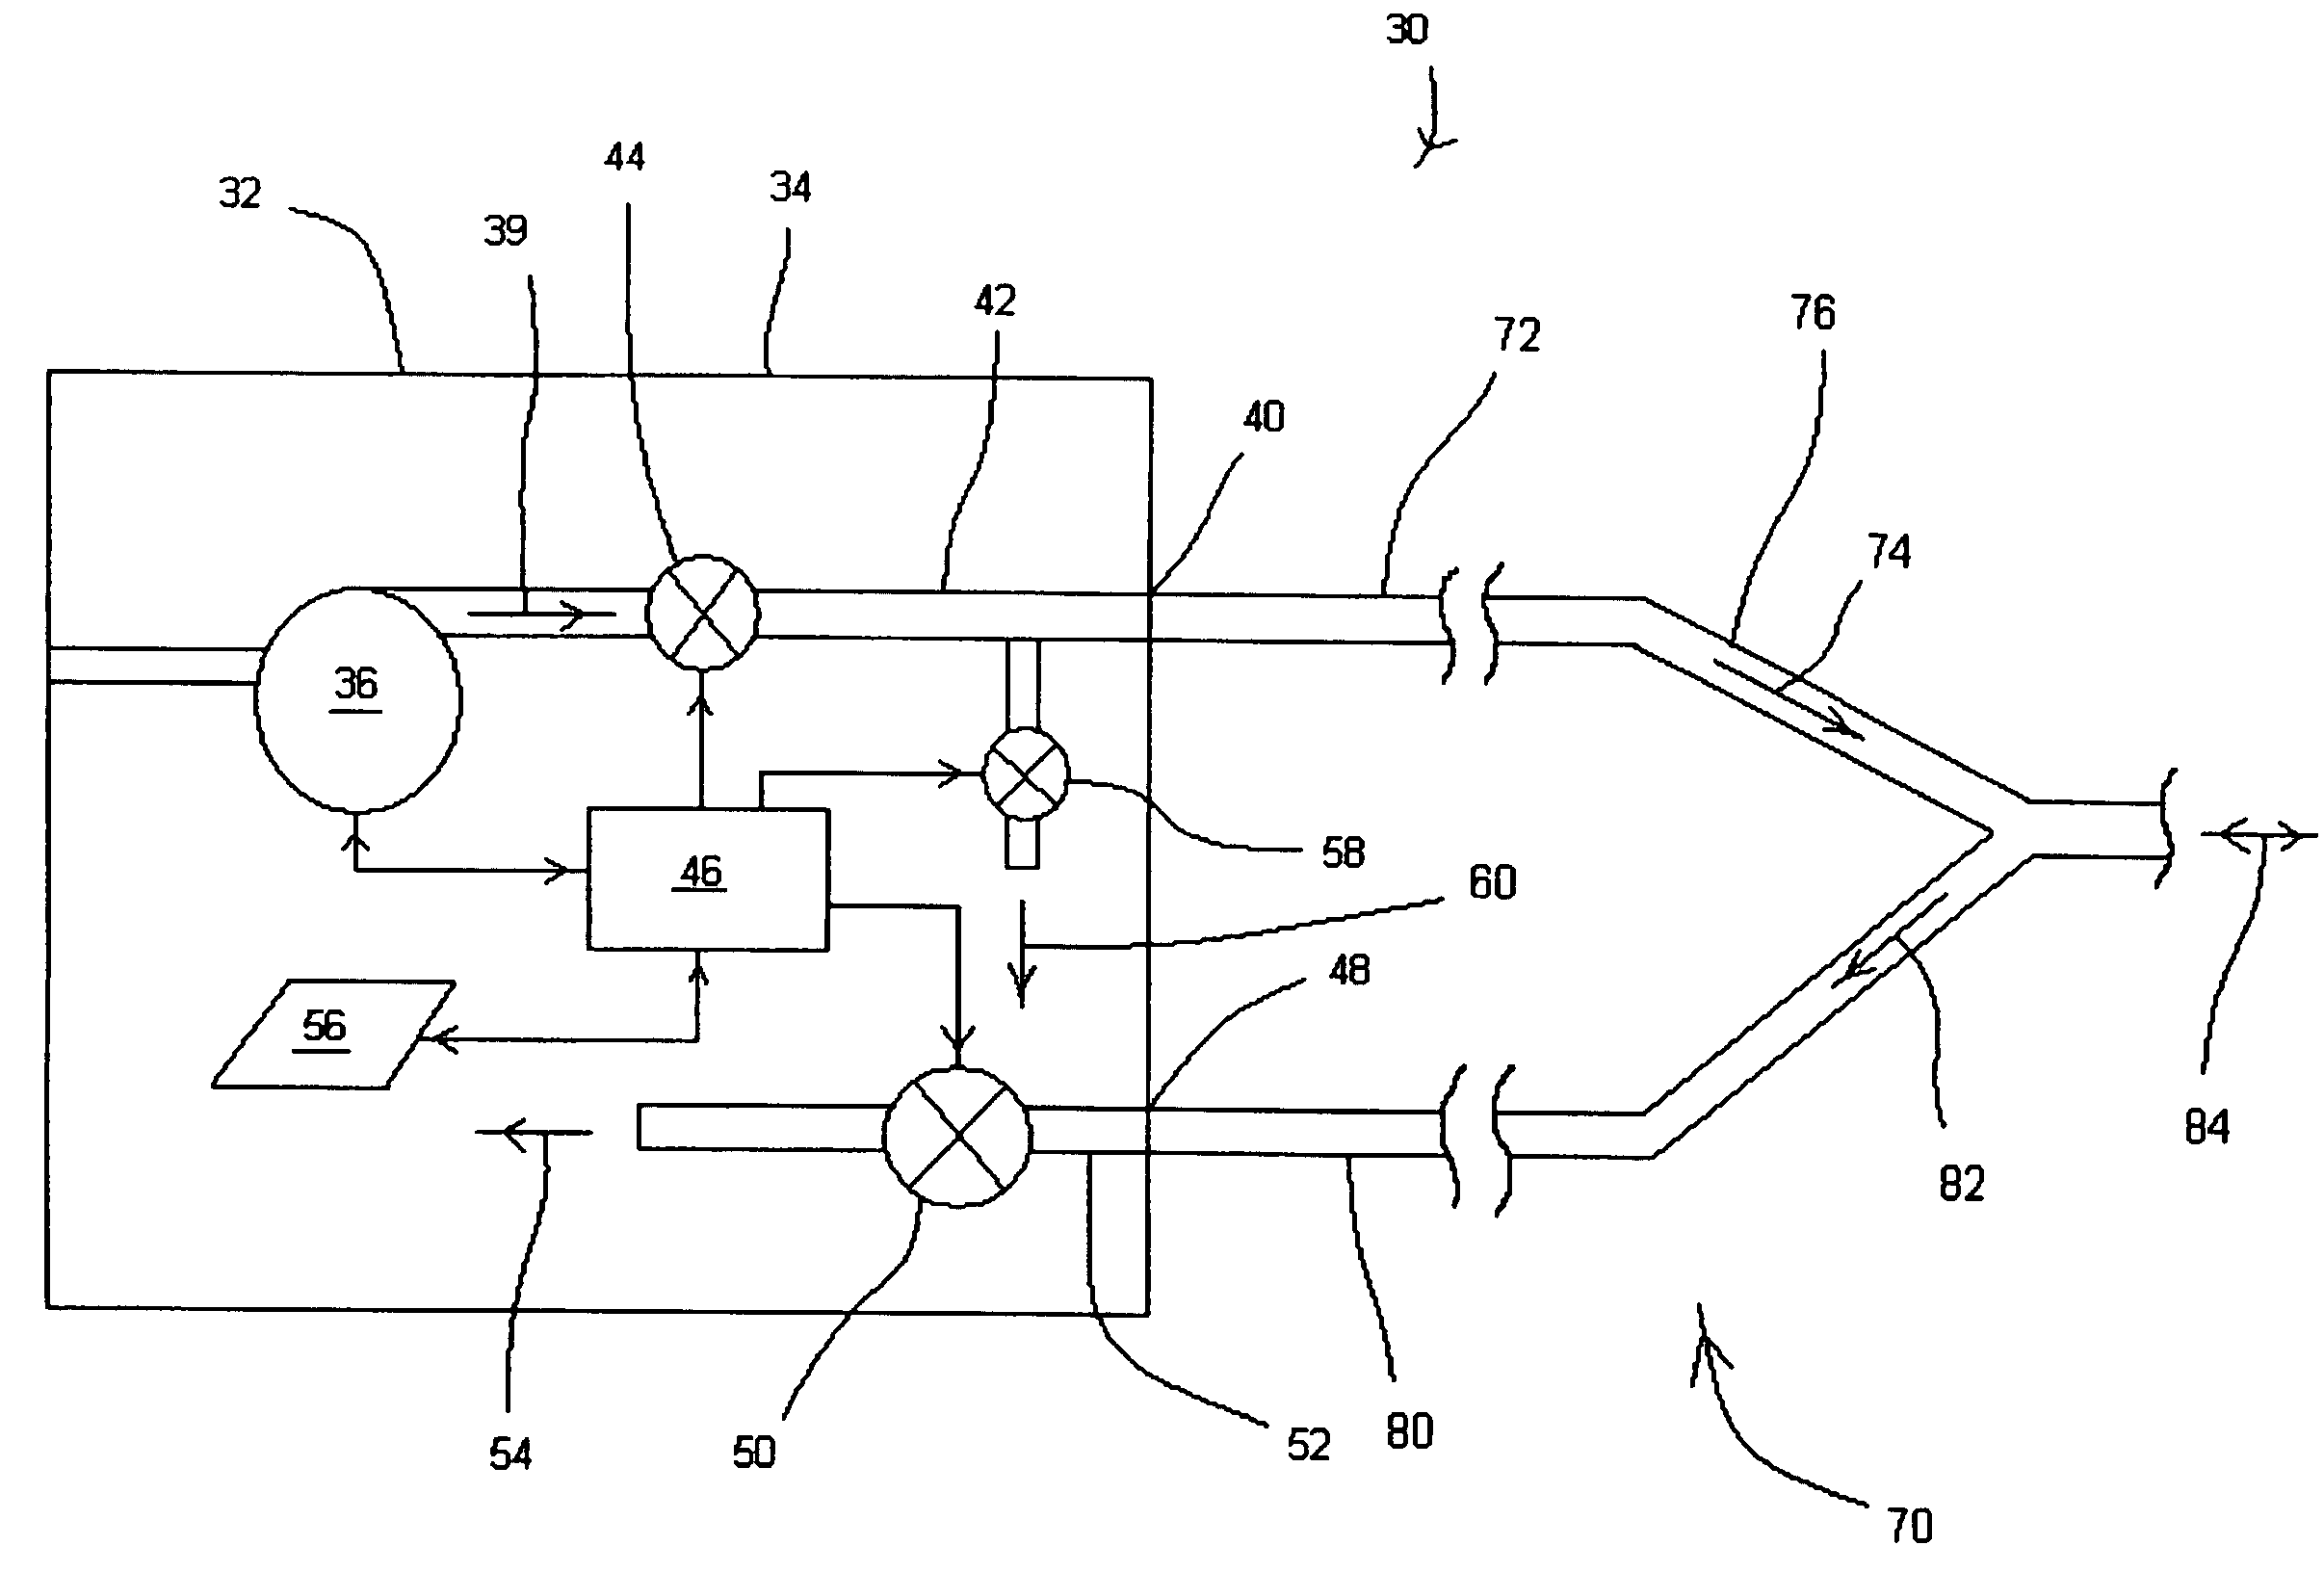 Ventilator adaptable for use with either a dual-limb circuit or a single-limb circuit